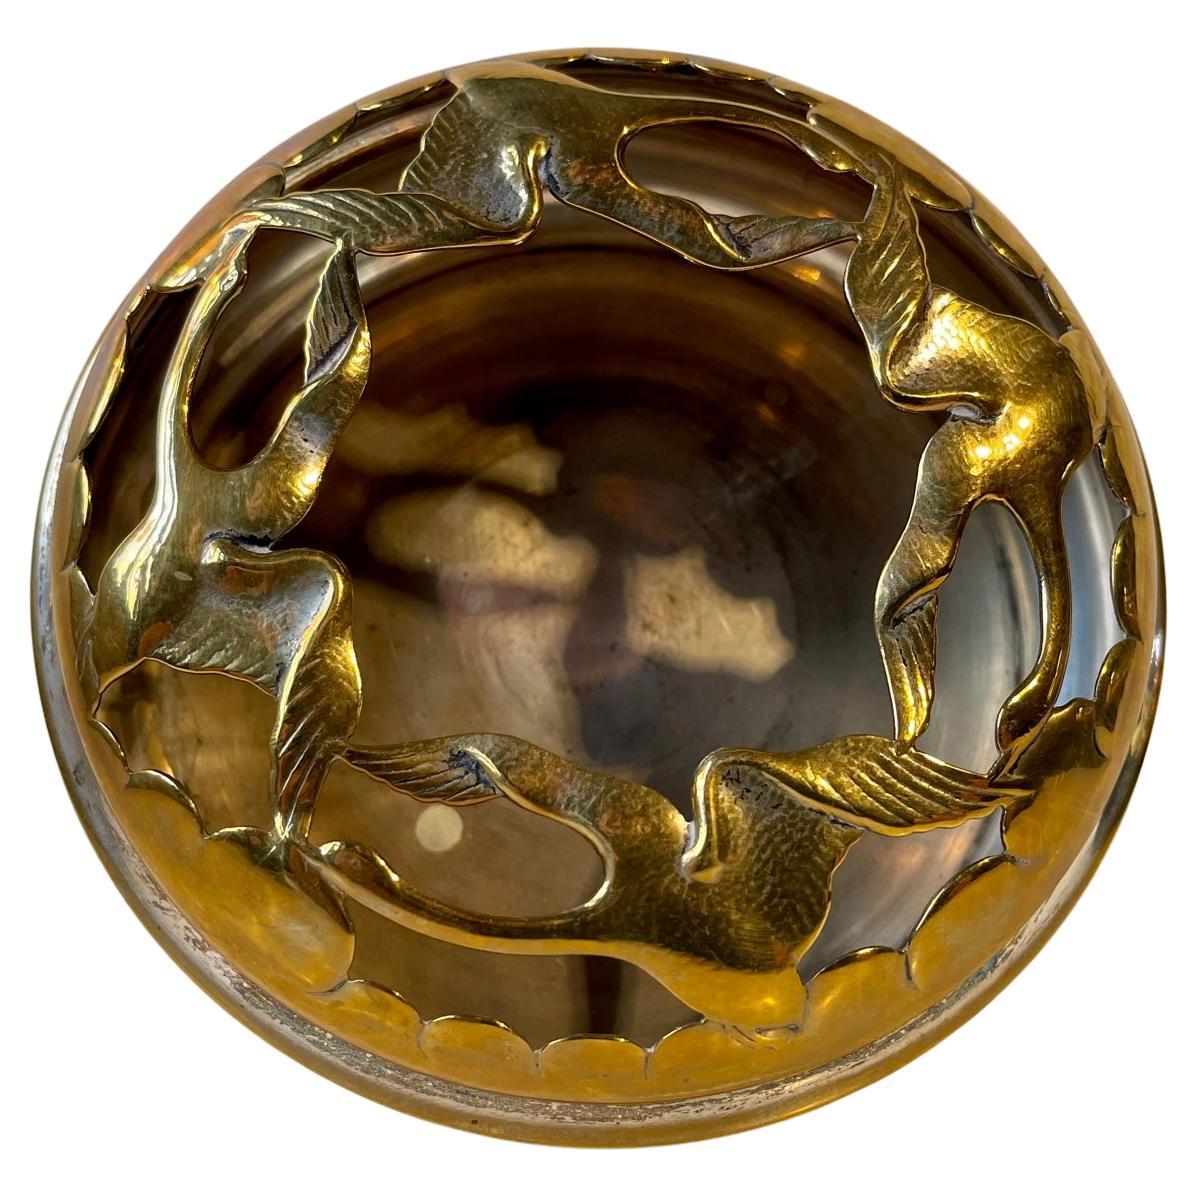 A decorative incense bowl - potpourri dish with a perforated top-mesh with interconnected swans. It made from brass and it is partially silver plated. It was designed and made by Jewelry Firm B&T in Denmark circa 1930-35. Measurements: D: 13.5 cm,